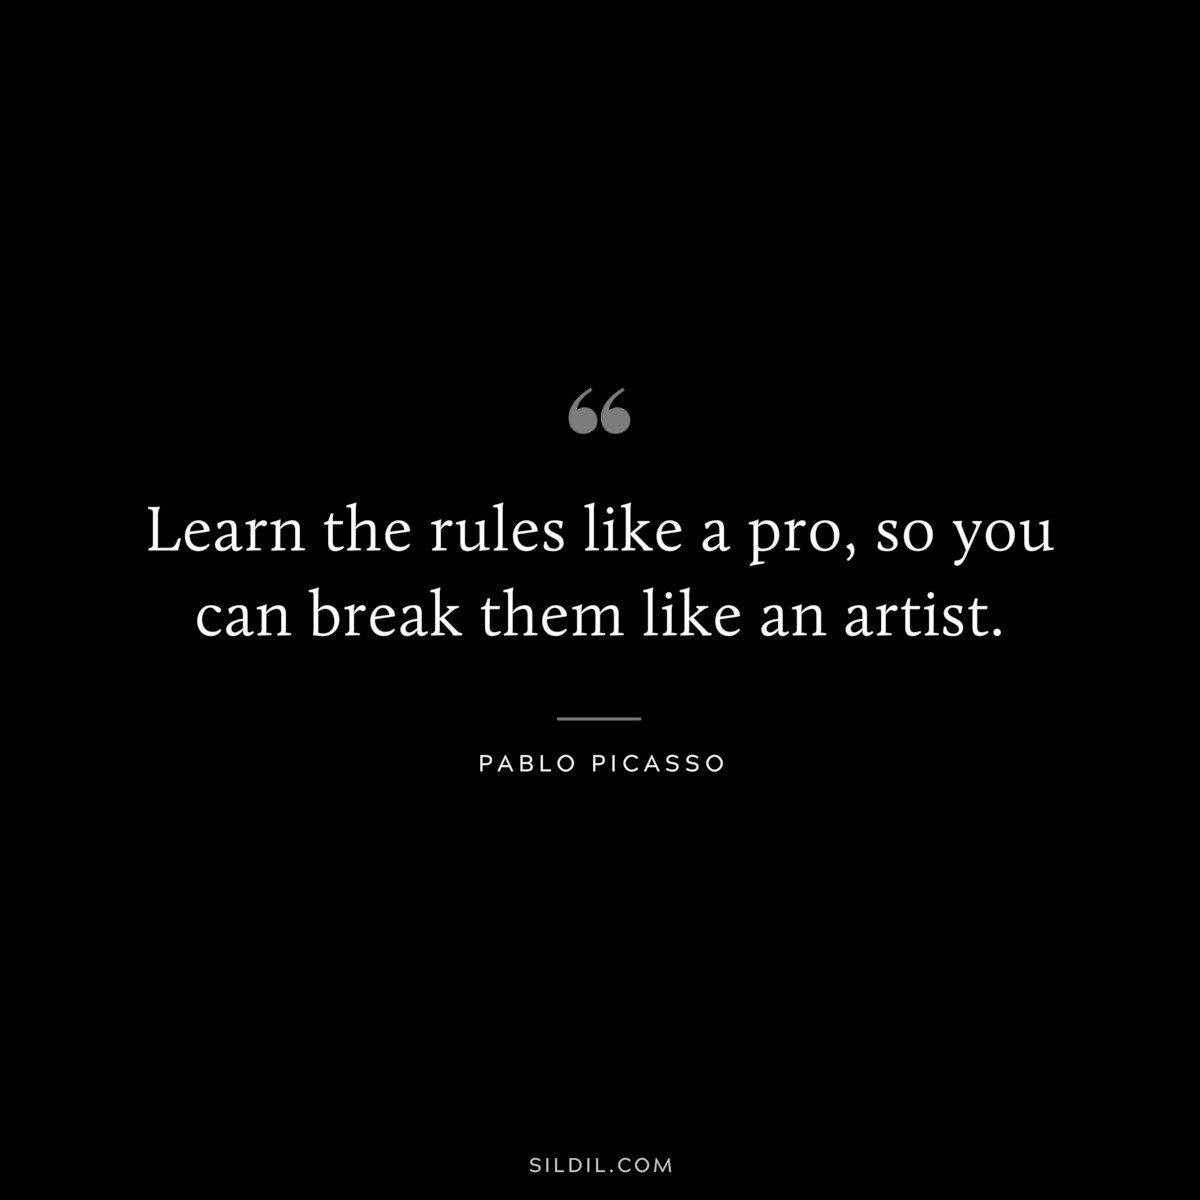 Learn the rules like a pro, so you can break them like an artist. ― Pablo Picasso